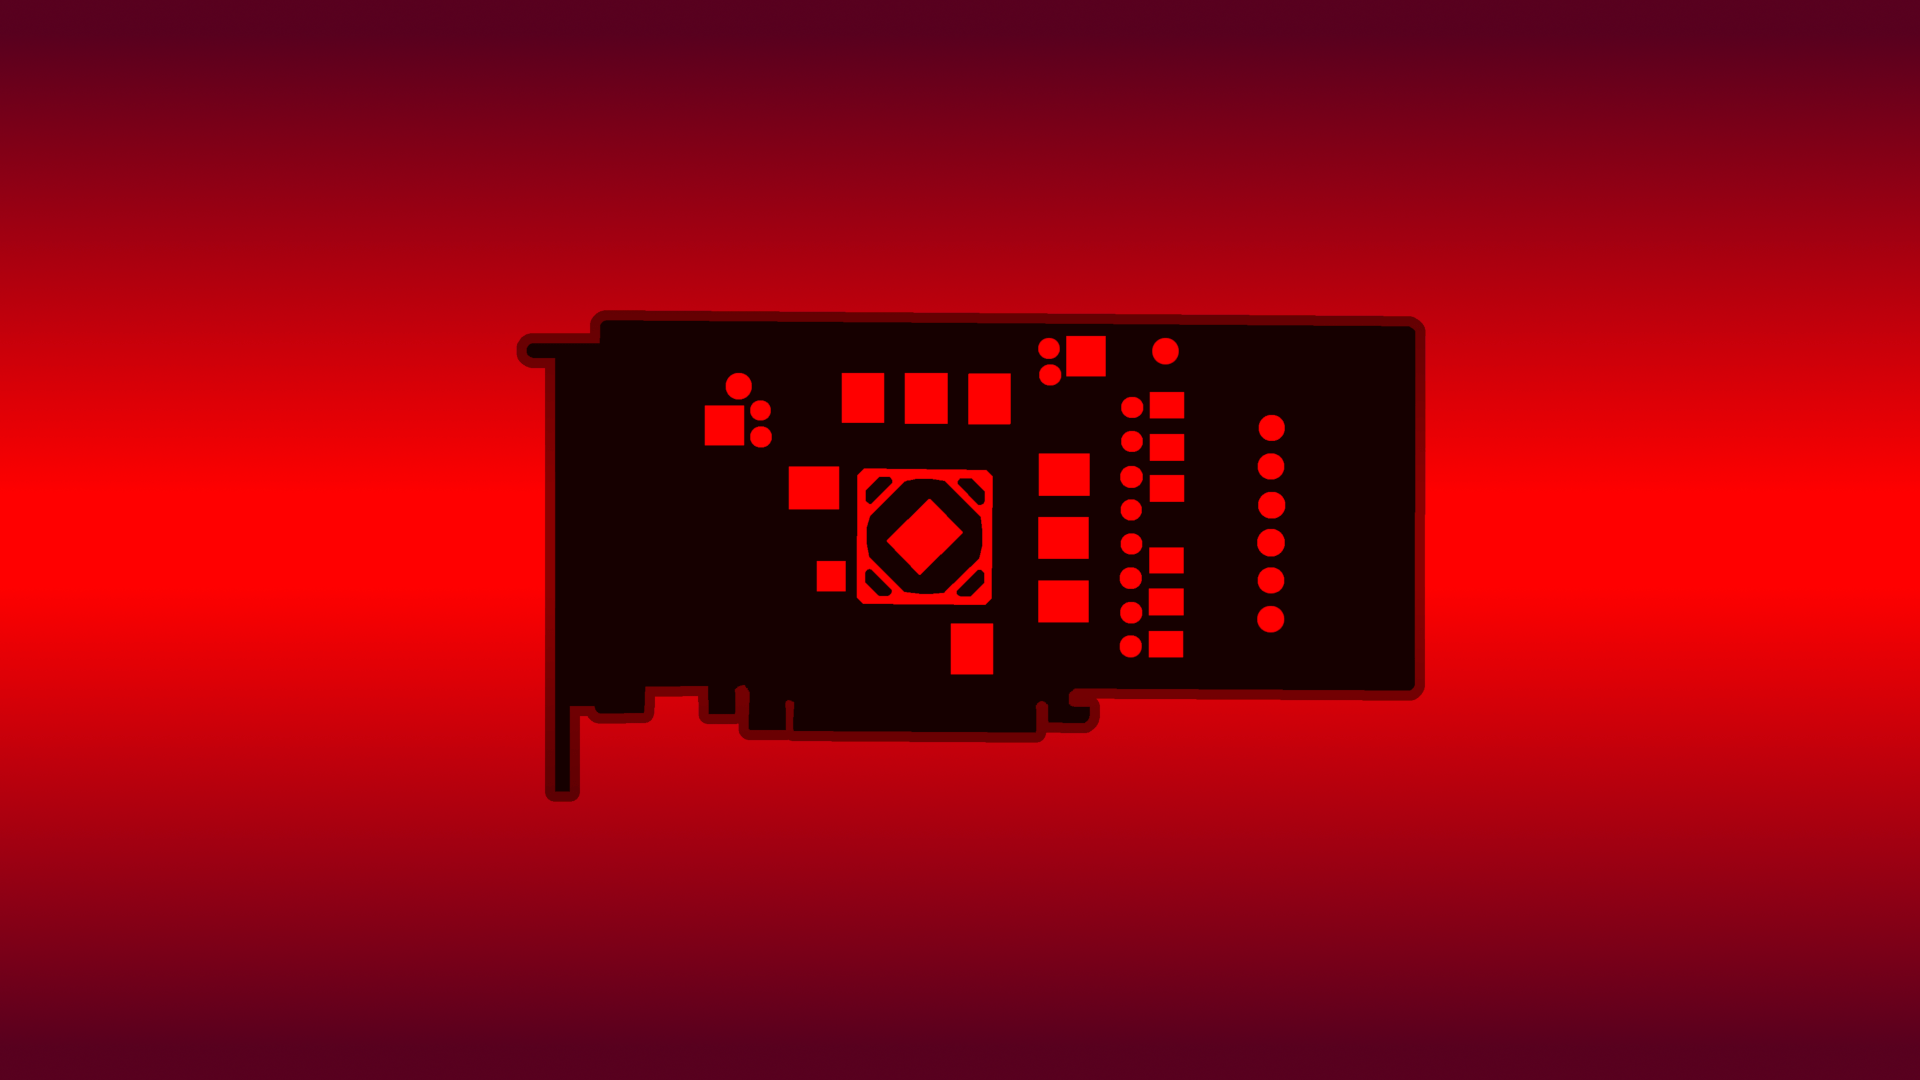 A simple wallpaper I've done based on rx 580 PCB